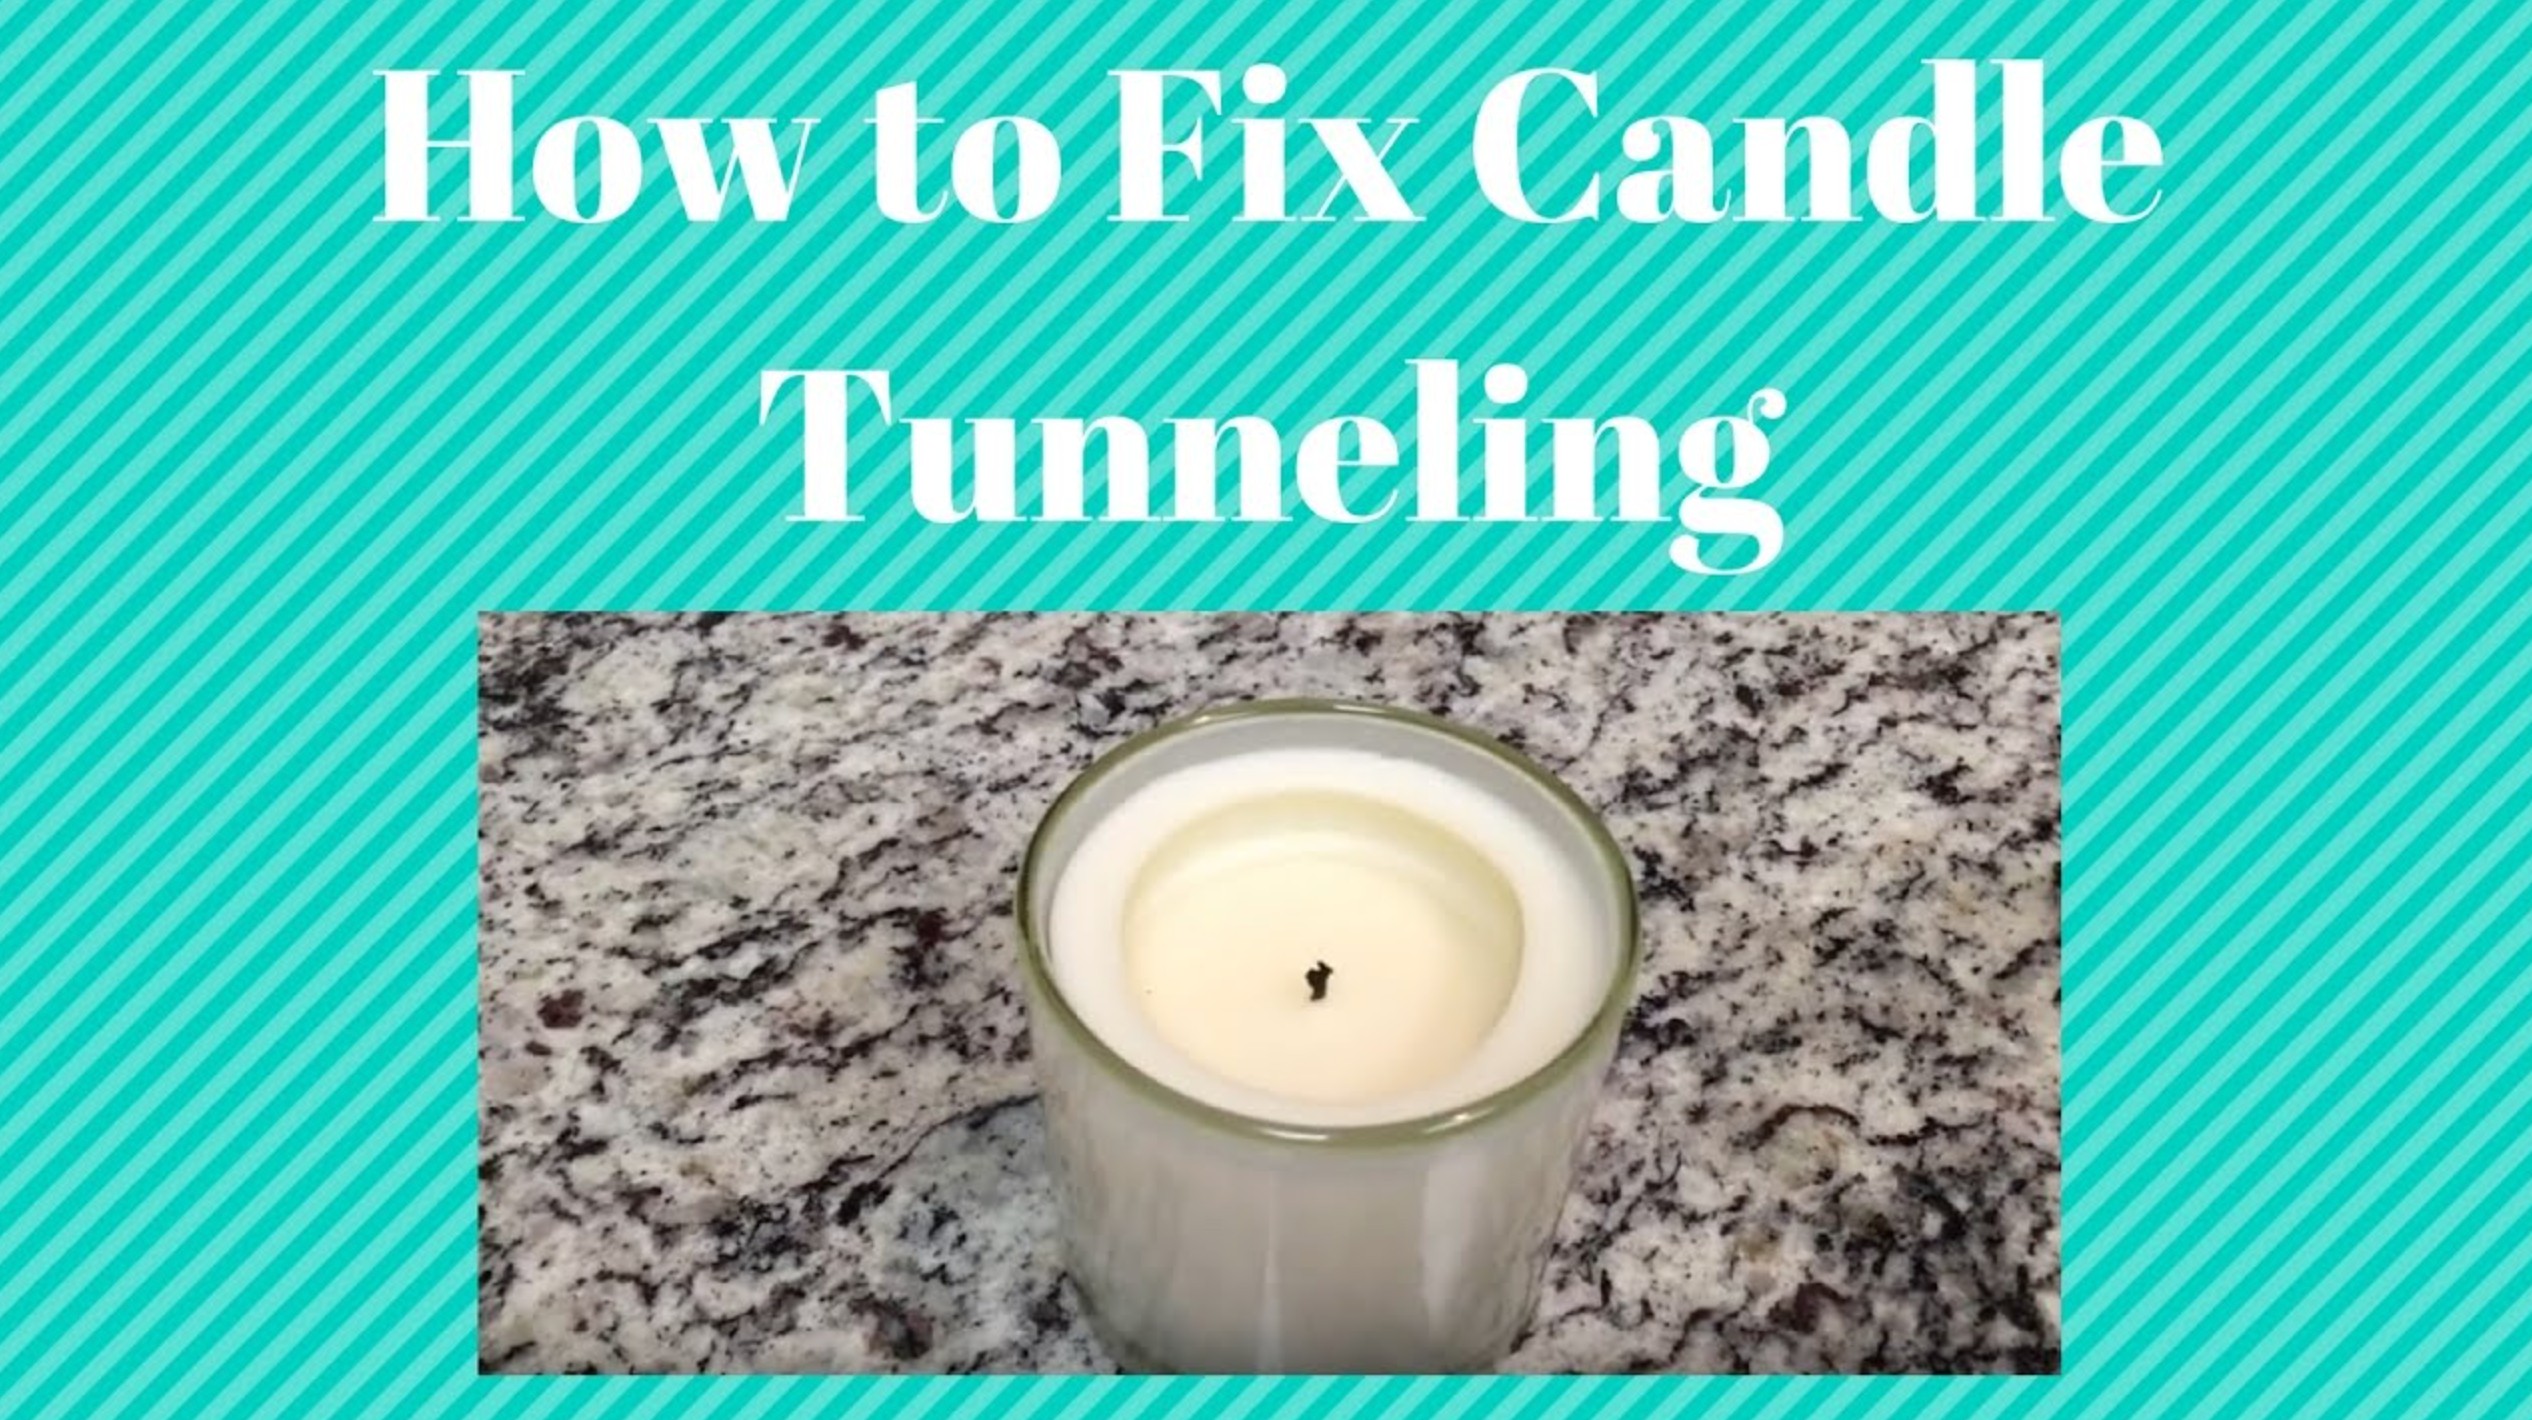 How to Fix Candle Tunneling